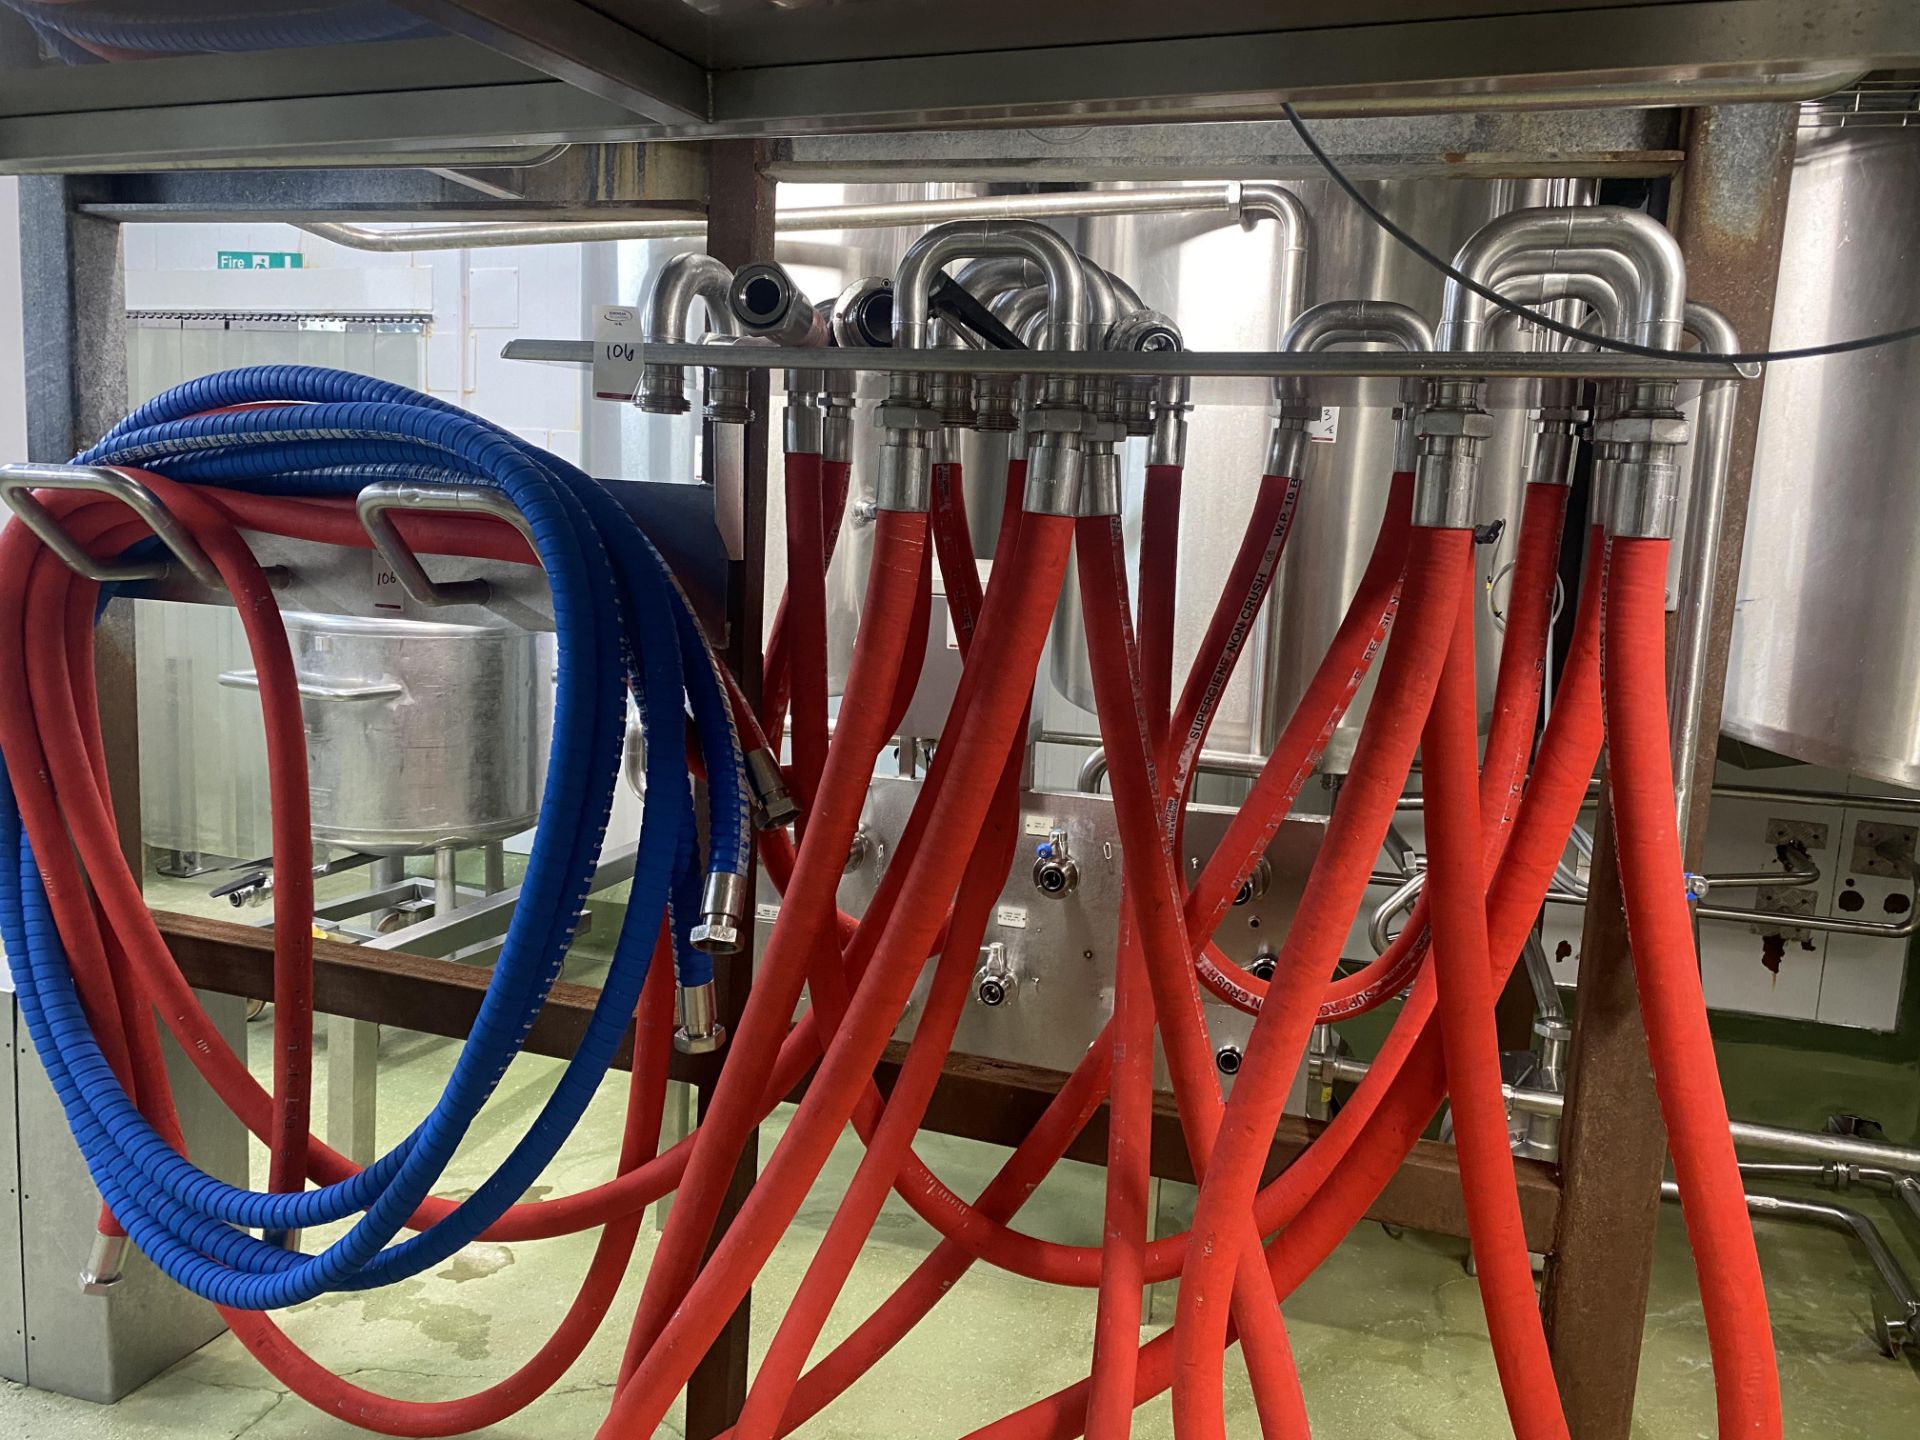 Purpose built stainless steel hose holder and various hoses as lotted